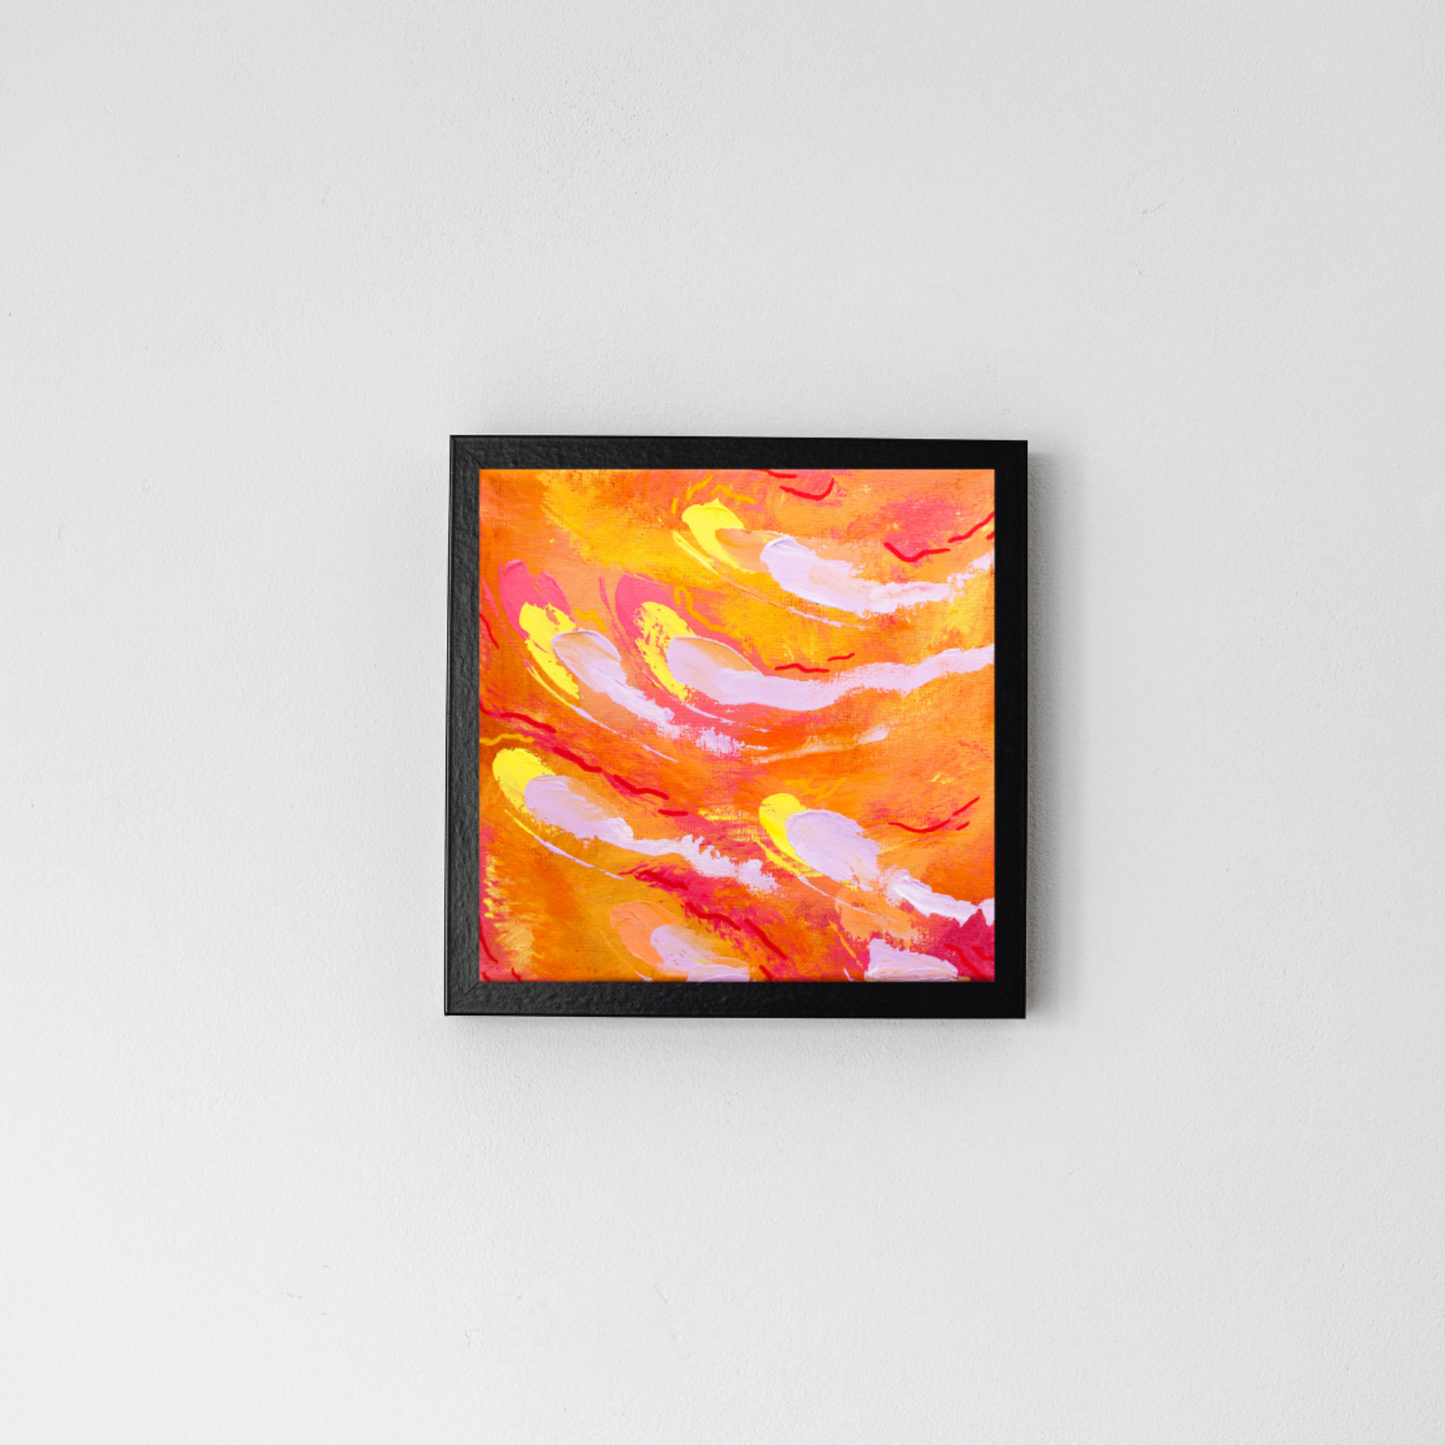 Grey wall with a black frame in the middle. In the black frame is an orange abstract painting with red, yellow, and pale purple streaks throughout.